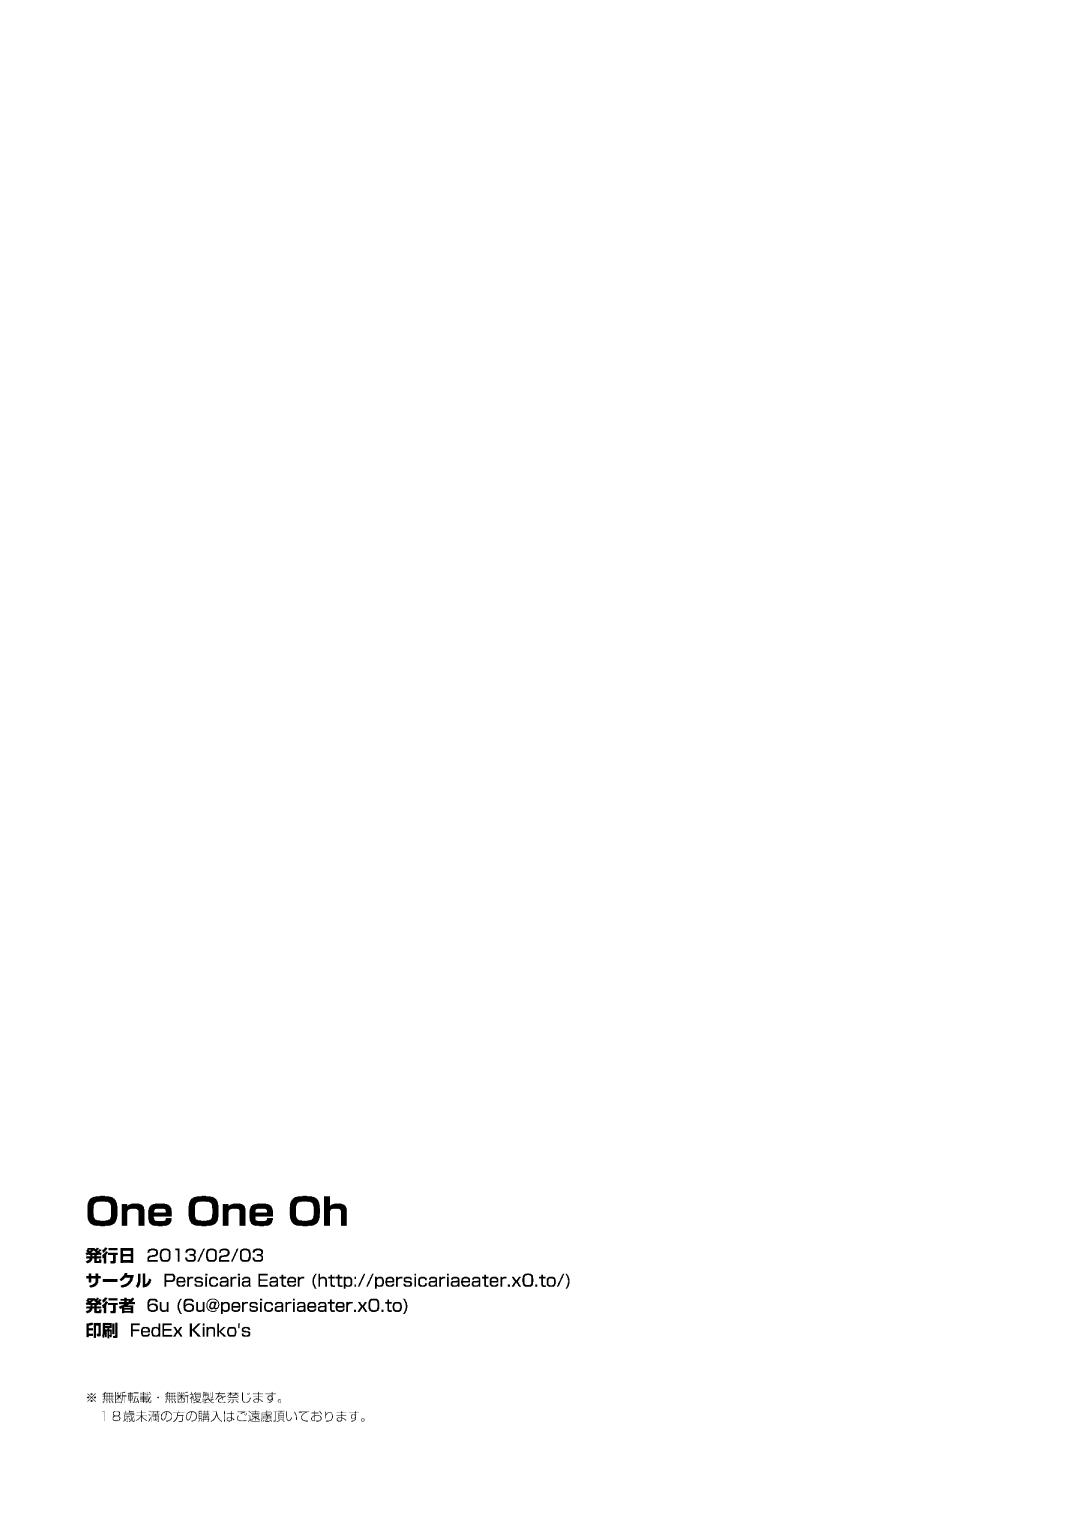 One One Oh 20